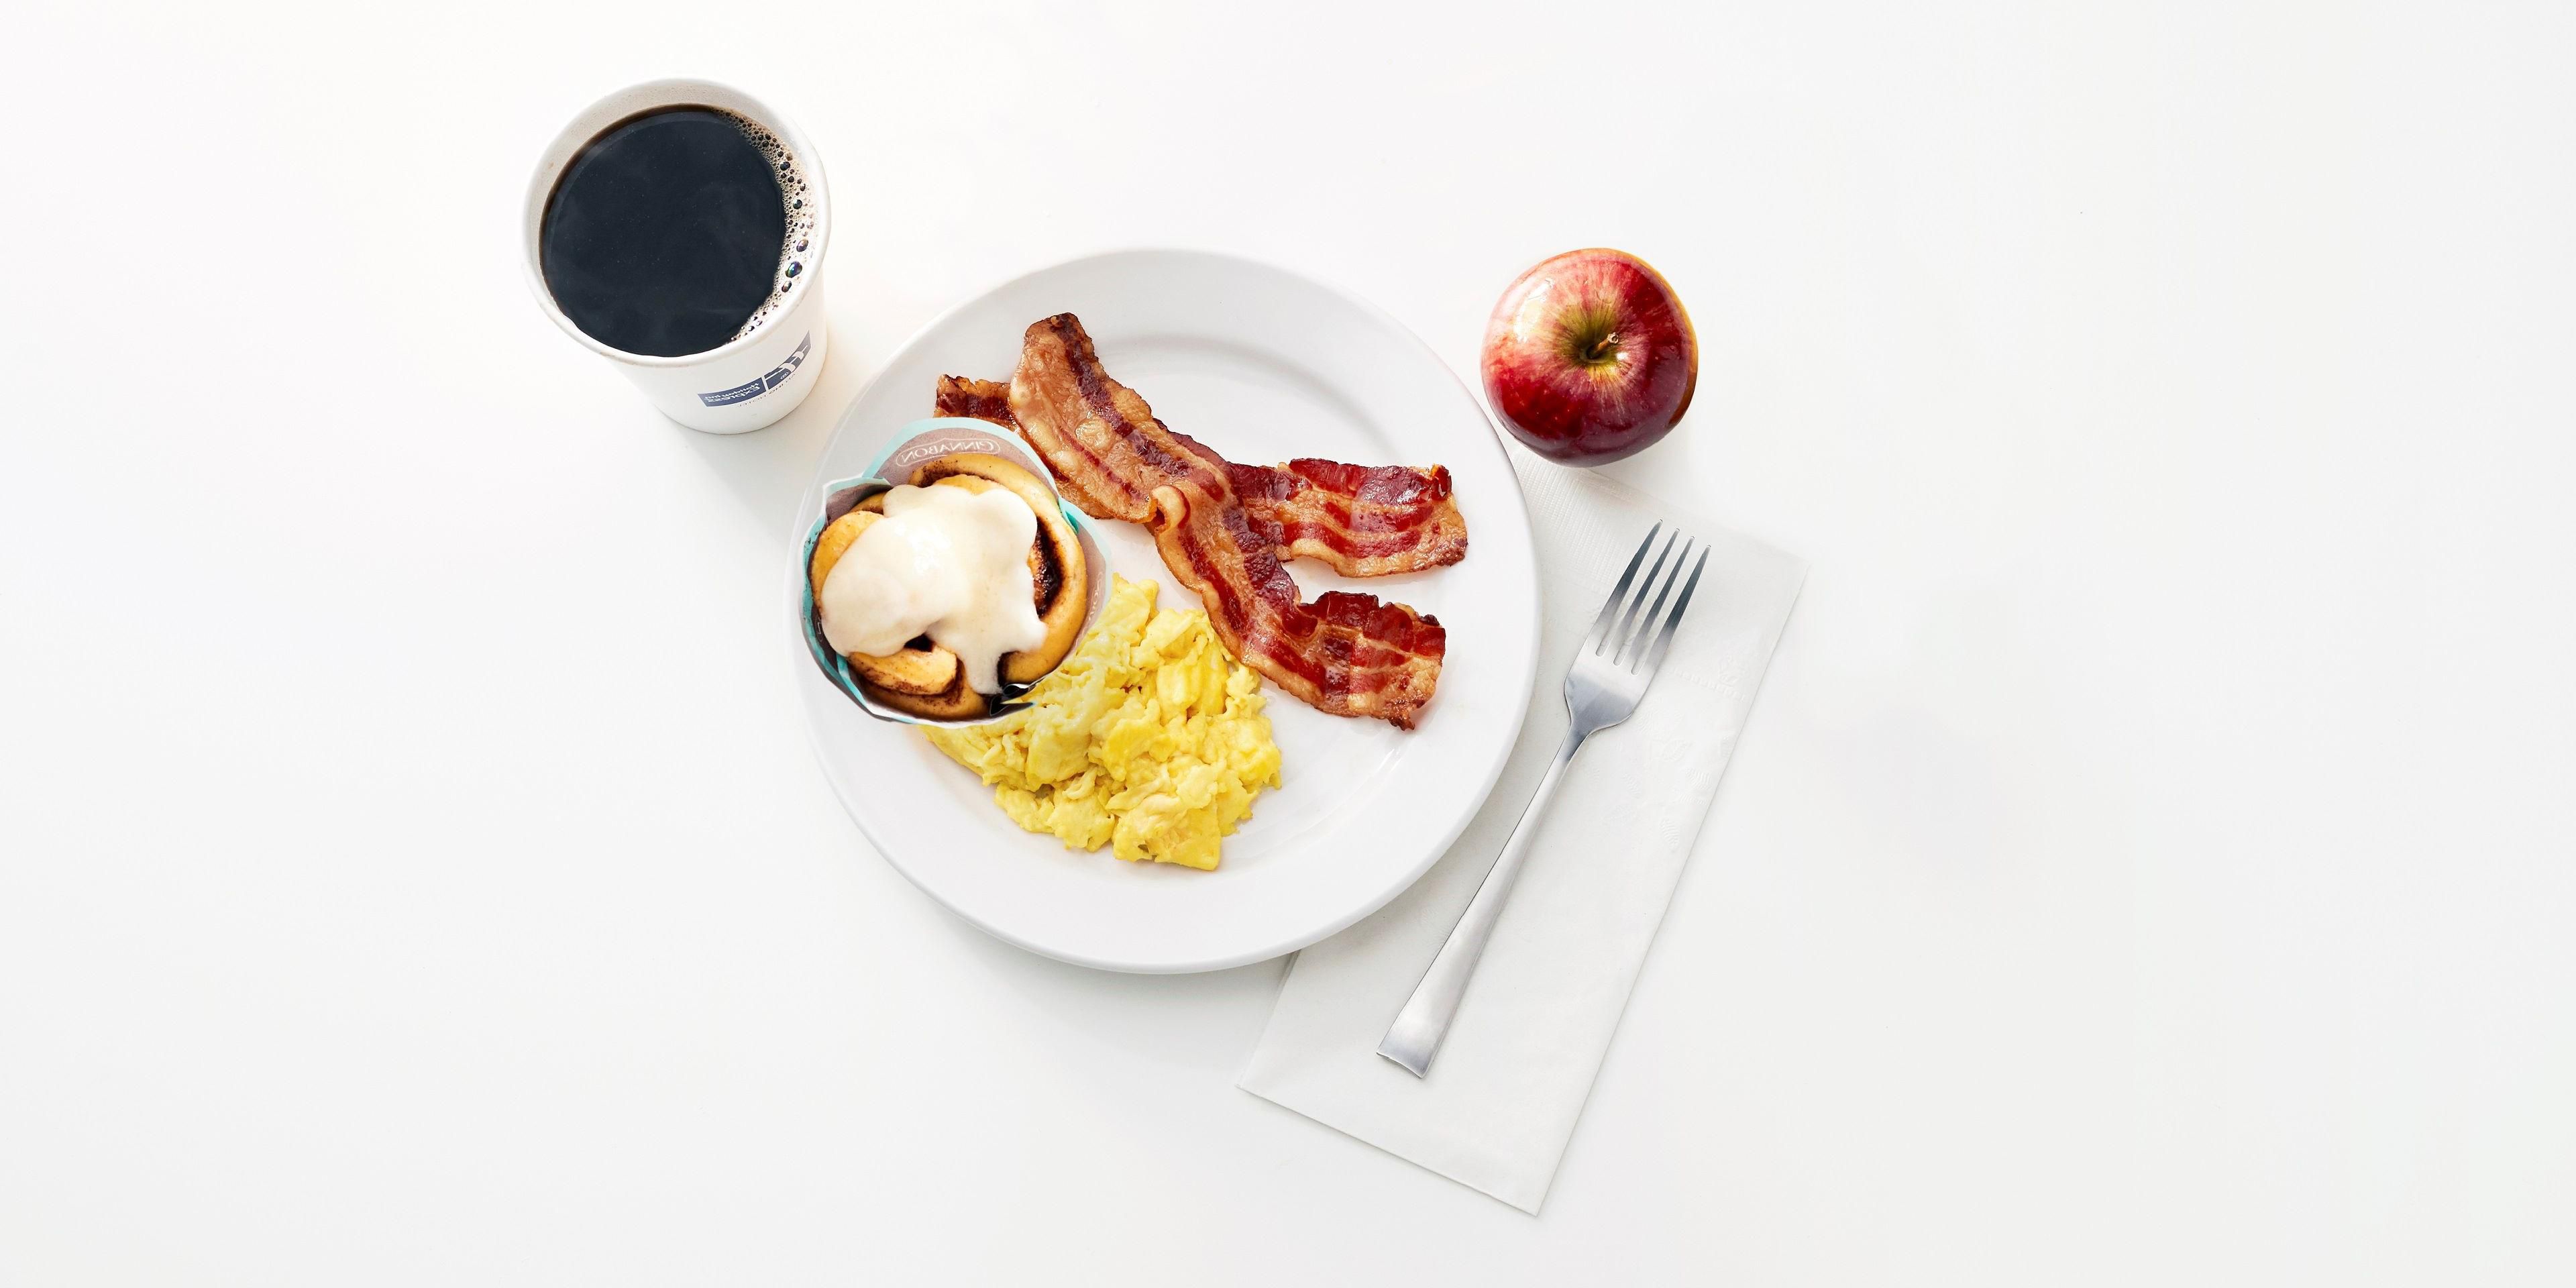 Kick start your day with our free Express Start Breakfast, with grab ‘n’ go options and favorites such as eggs and bacon, hot pancakes, our signature cinnamon rolls and fresh coffee. Offered from 6AM to 9AM.